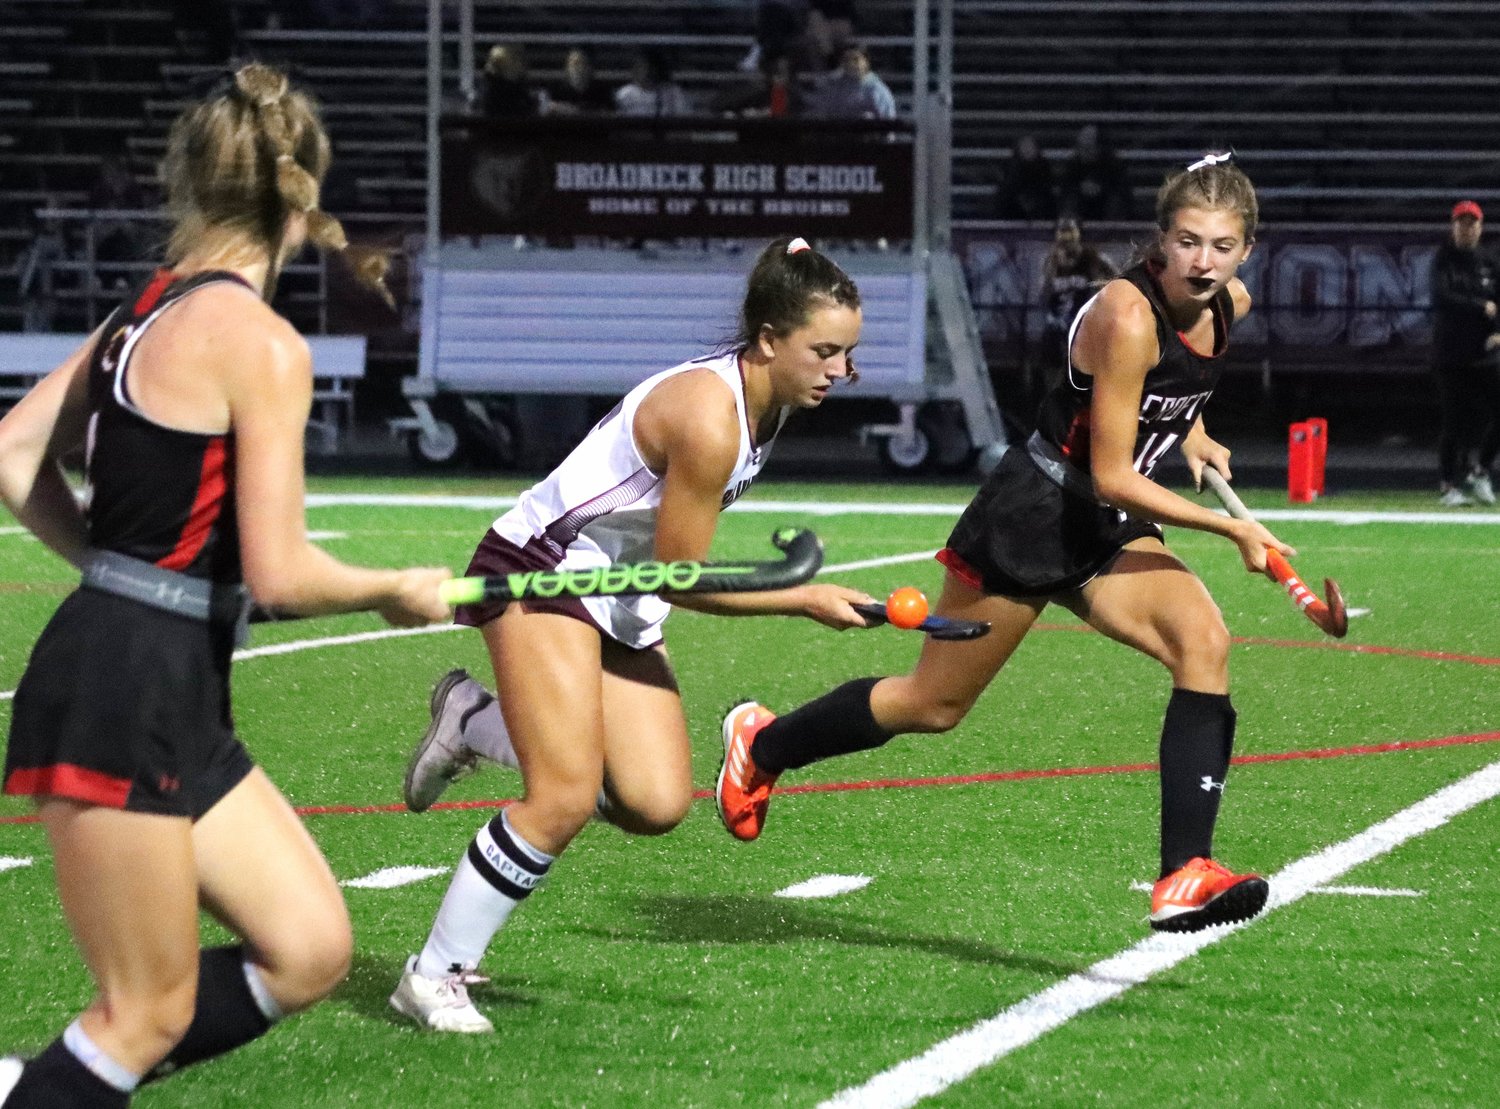 Arden Hunteman contributed one goal and one assist.